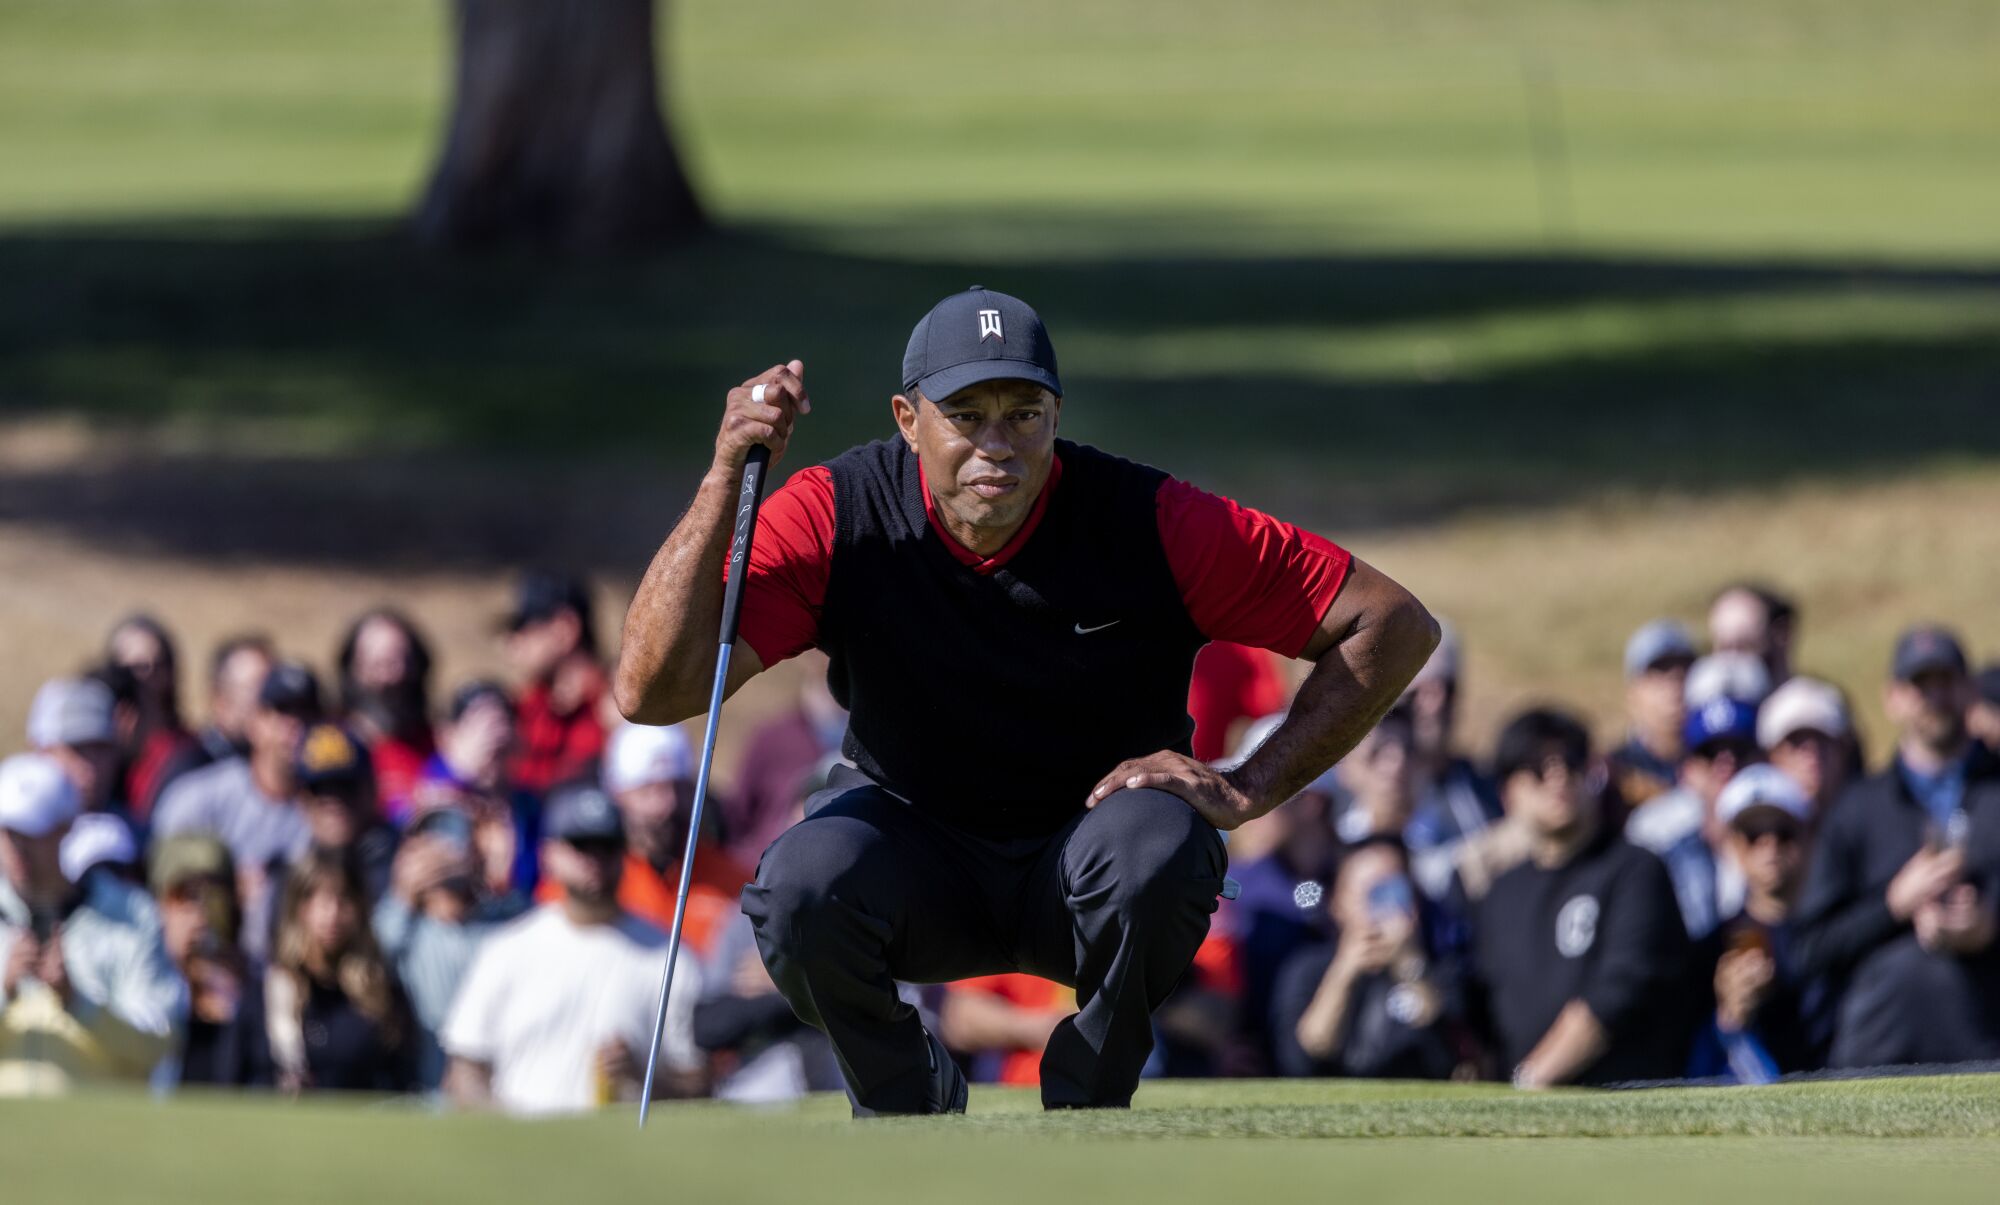 Tiger Woods lines up his putt on the ninth green in the final round.